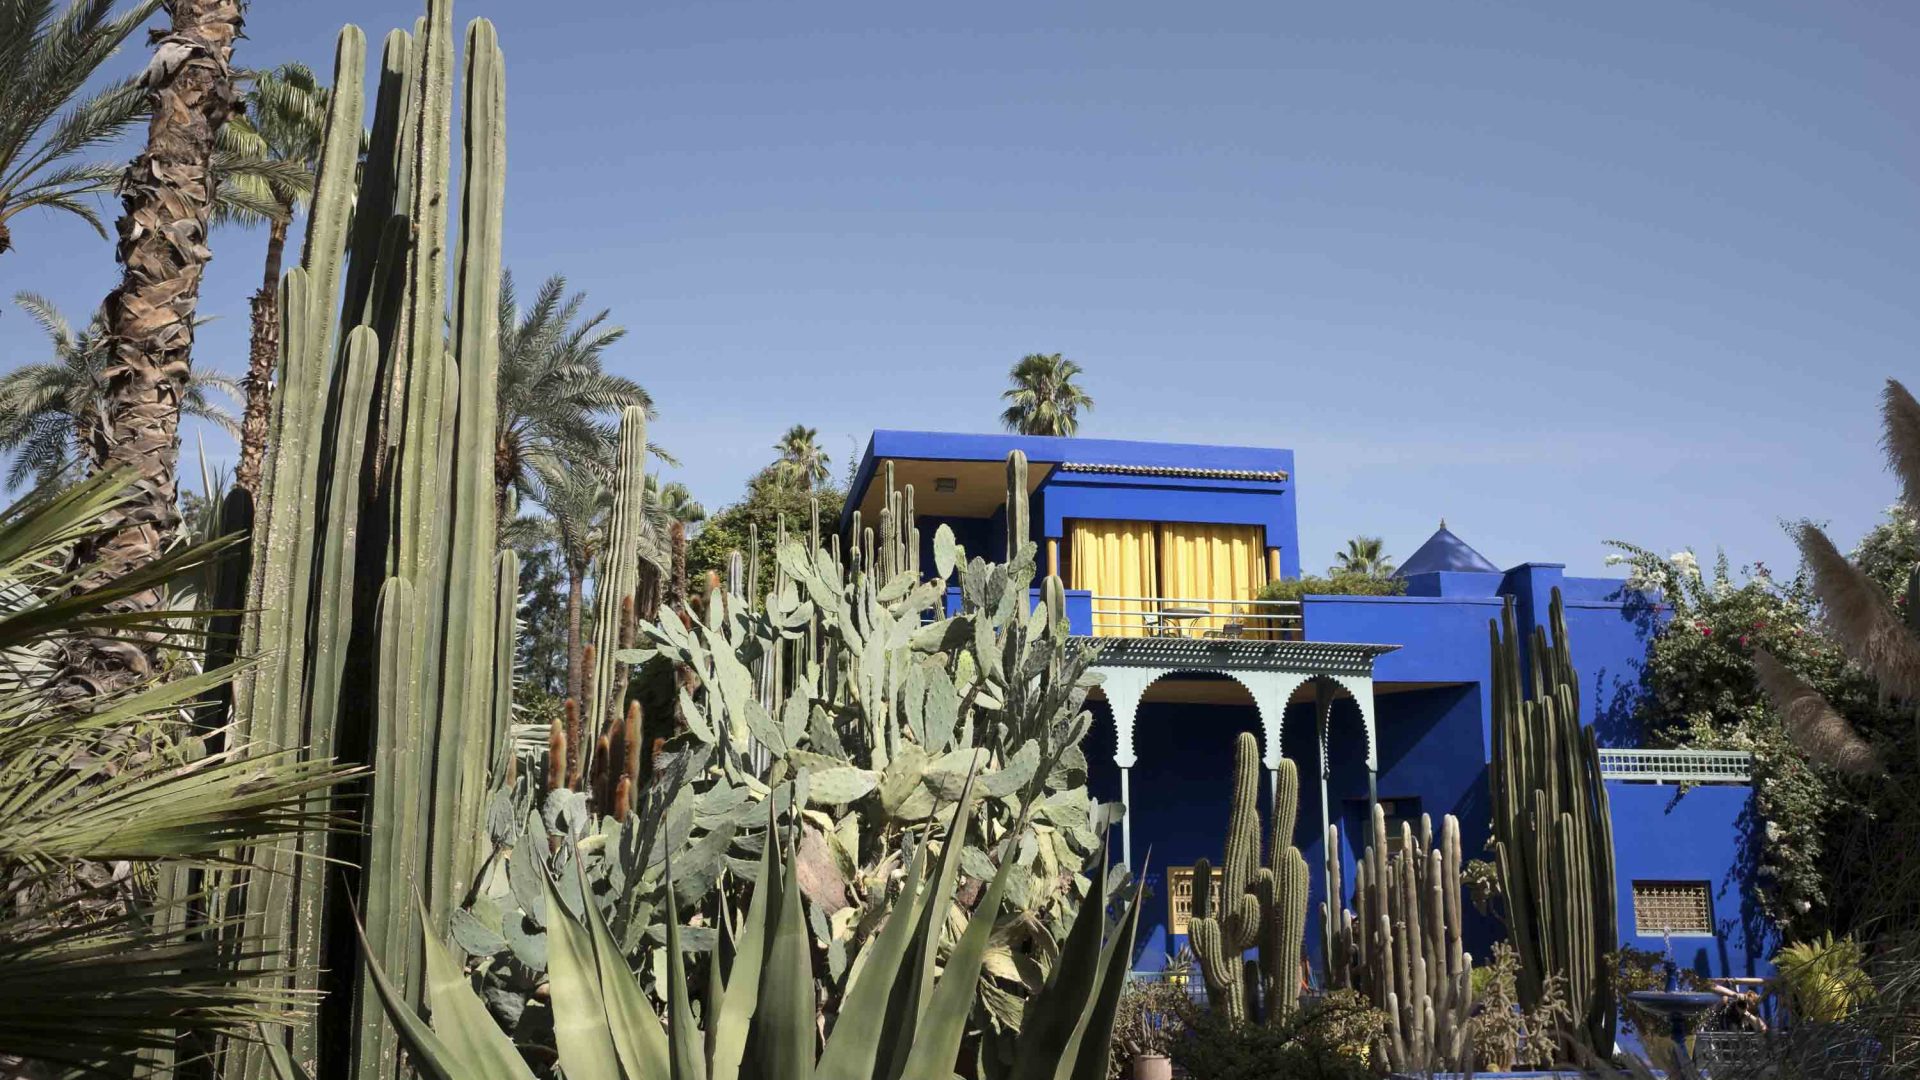 A modern blue Art Deco-style house with cactus and other plants in the foreground.